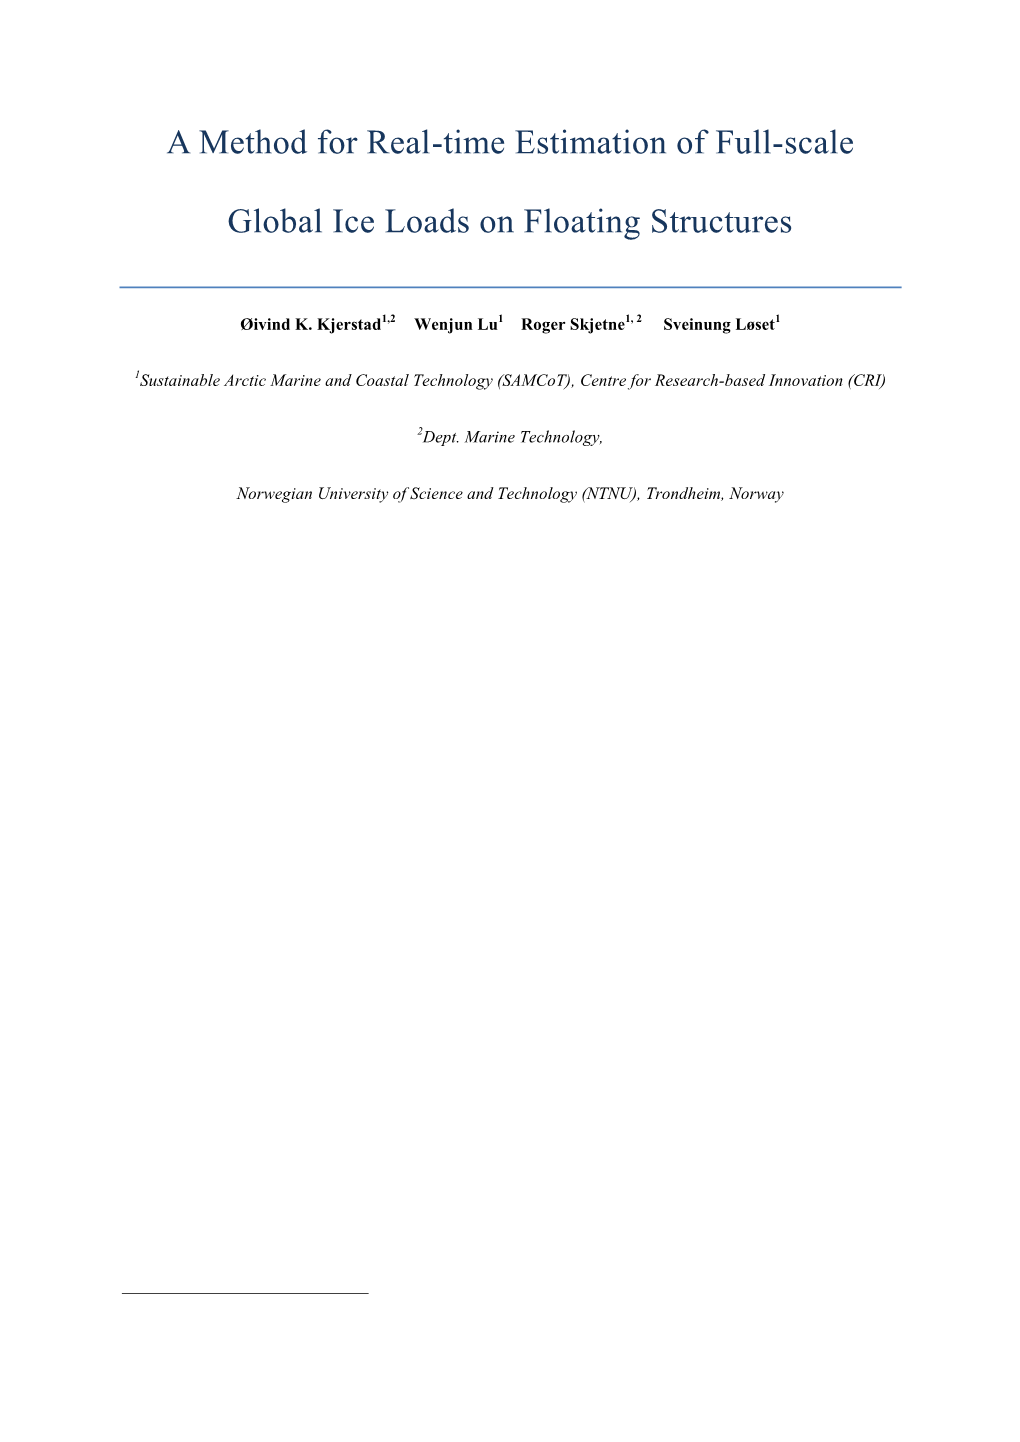 A Method for Real-Time Estimation of Full-Scale Global Ice Loads on Floating Structures